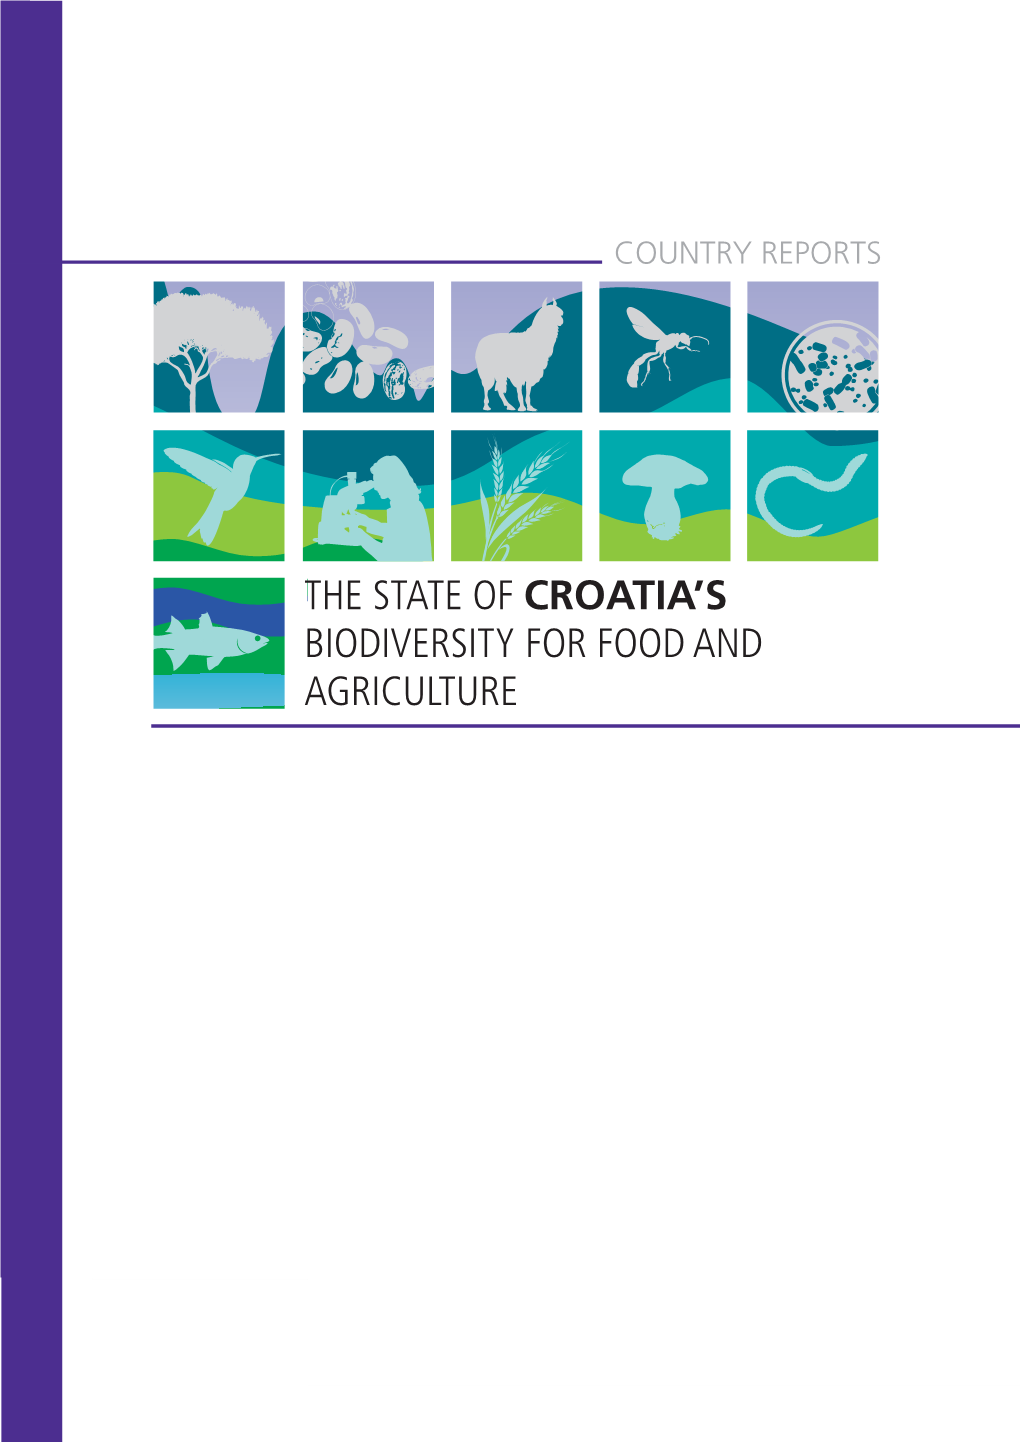 The State of Croatia's Biodiversity for Food And